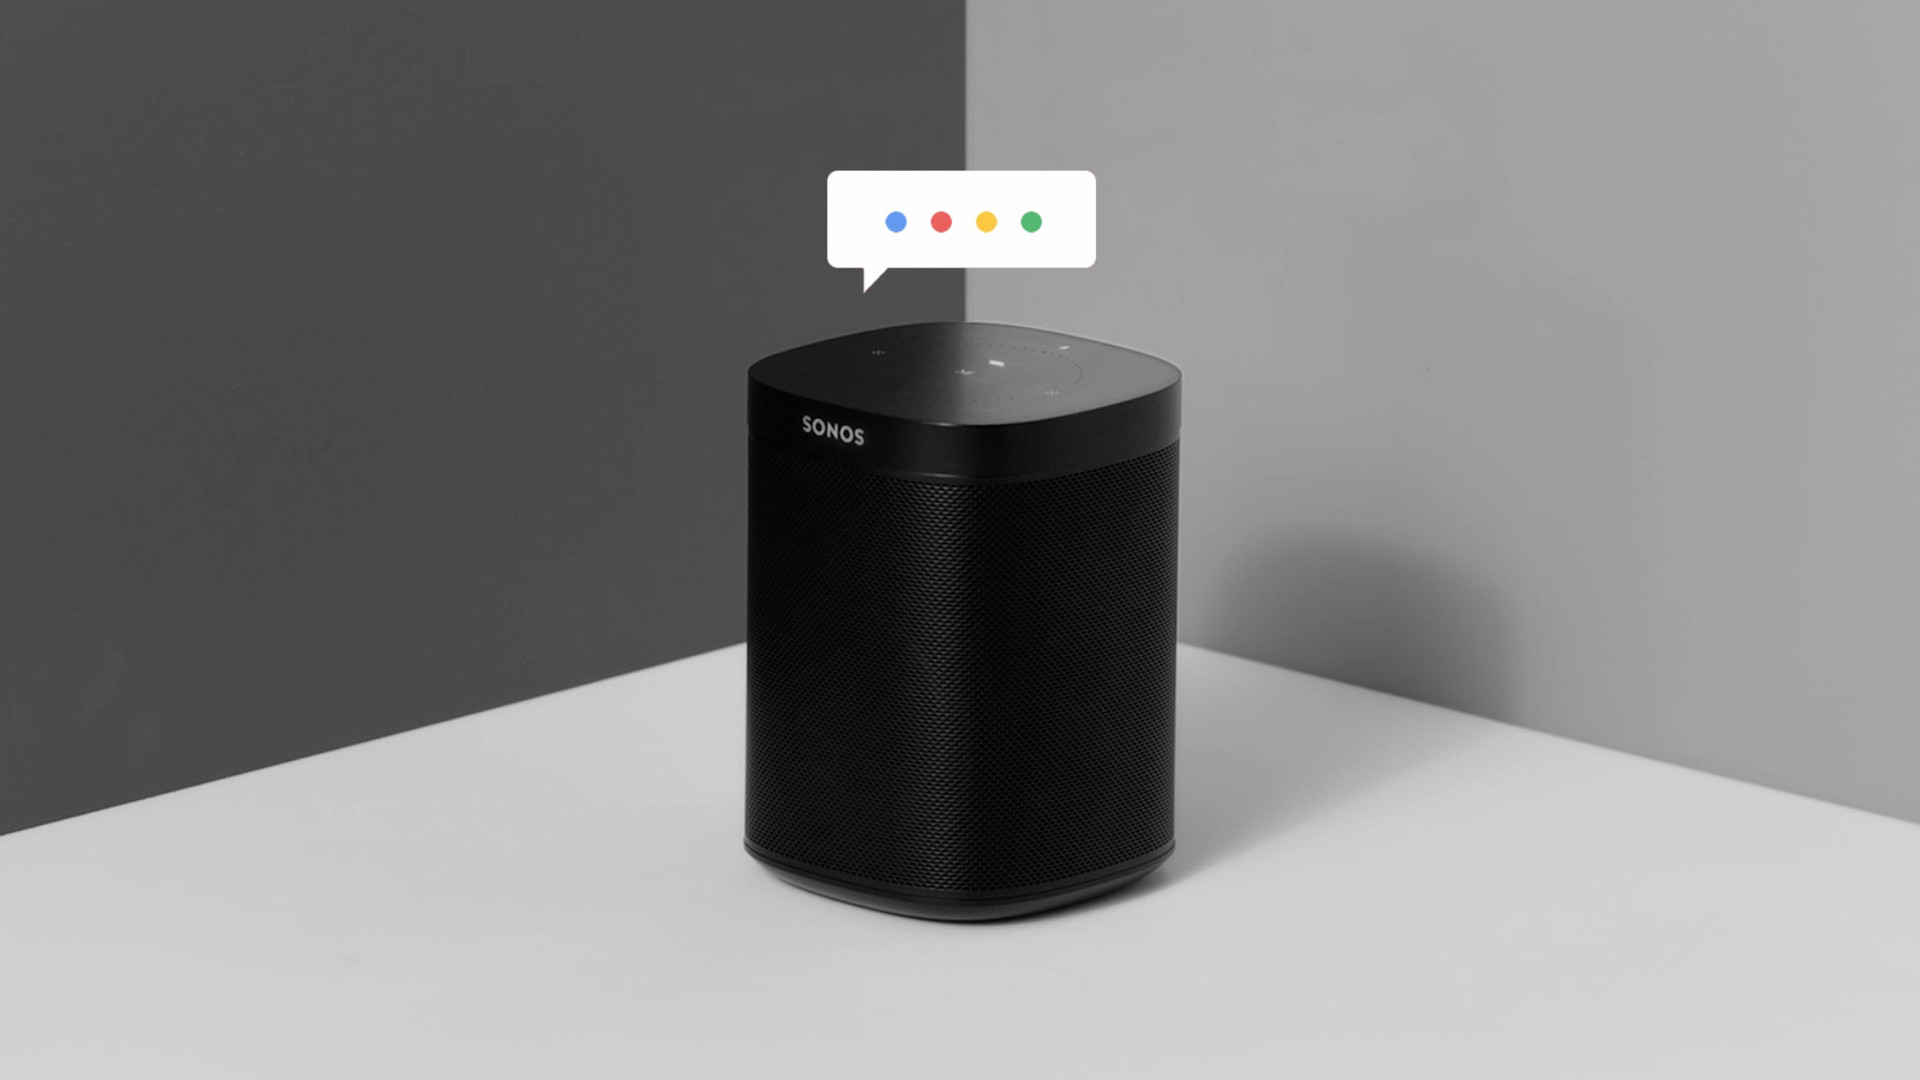 Sonos with Google Assistant support